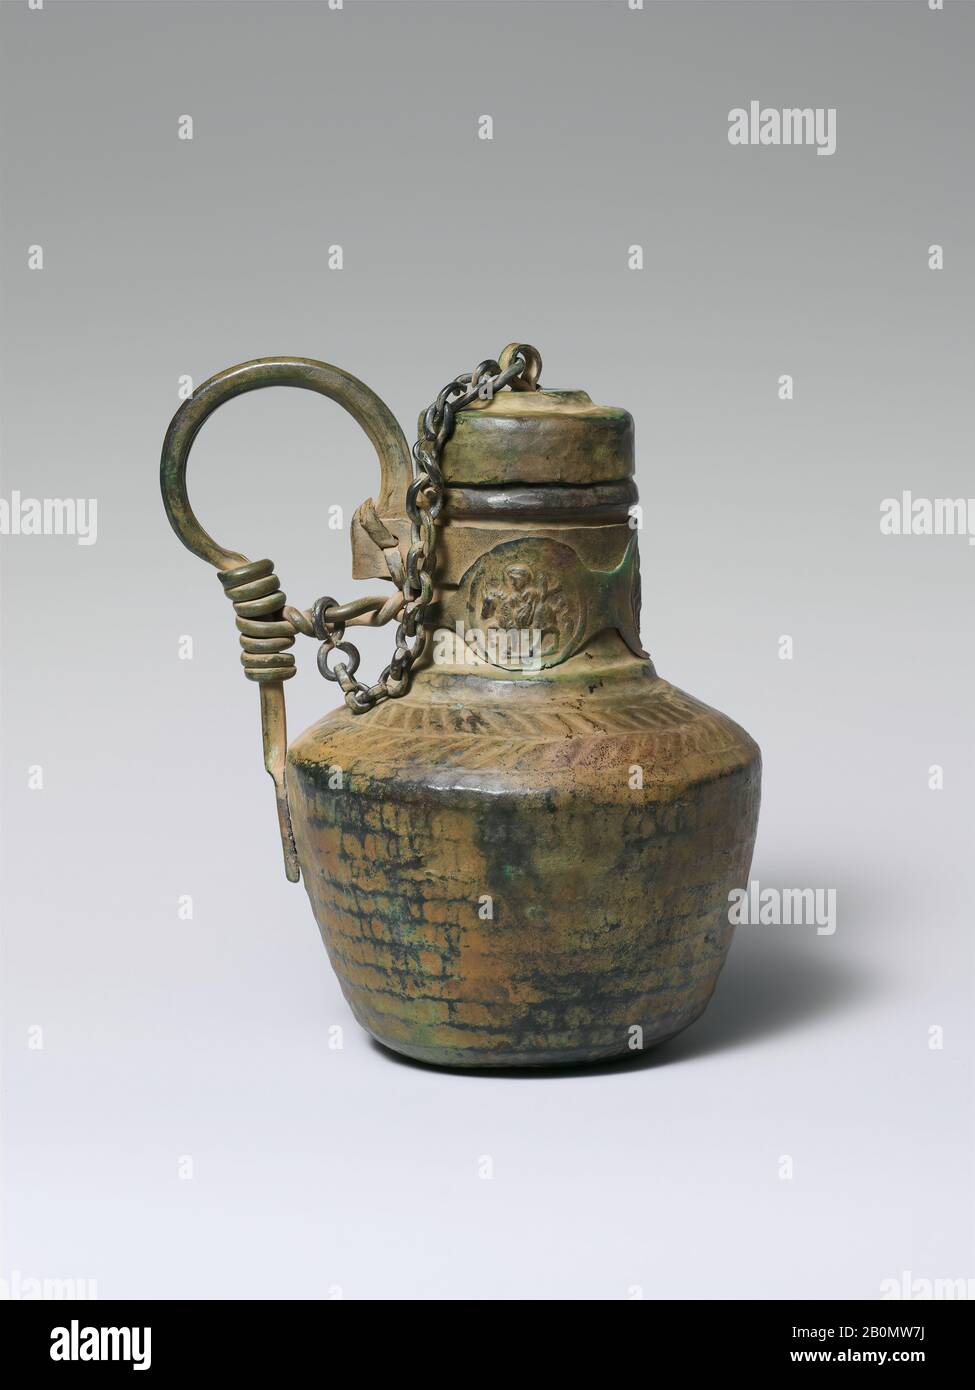 Jug with Medallions, Byzantine, 6th–8th century, Byzantine, Copper alloy, Overall: 4 15/16 x 4 x 3 3/8 in. (12.5 x 10.2 x 8.6 cm), Metalwork-Copper Stock Photo